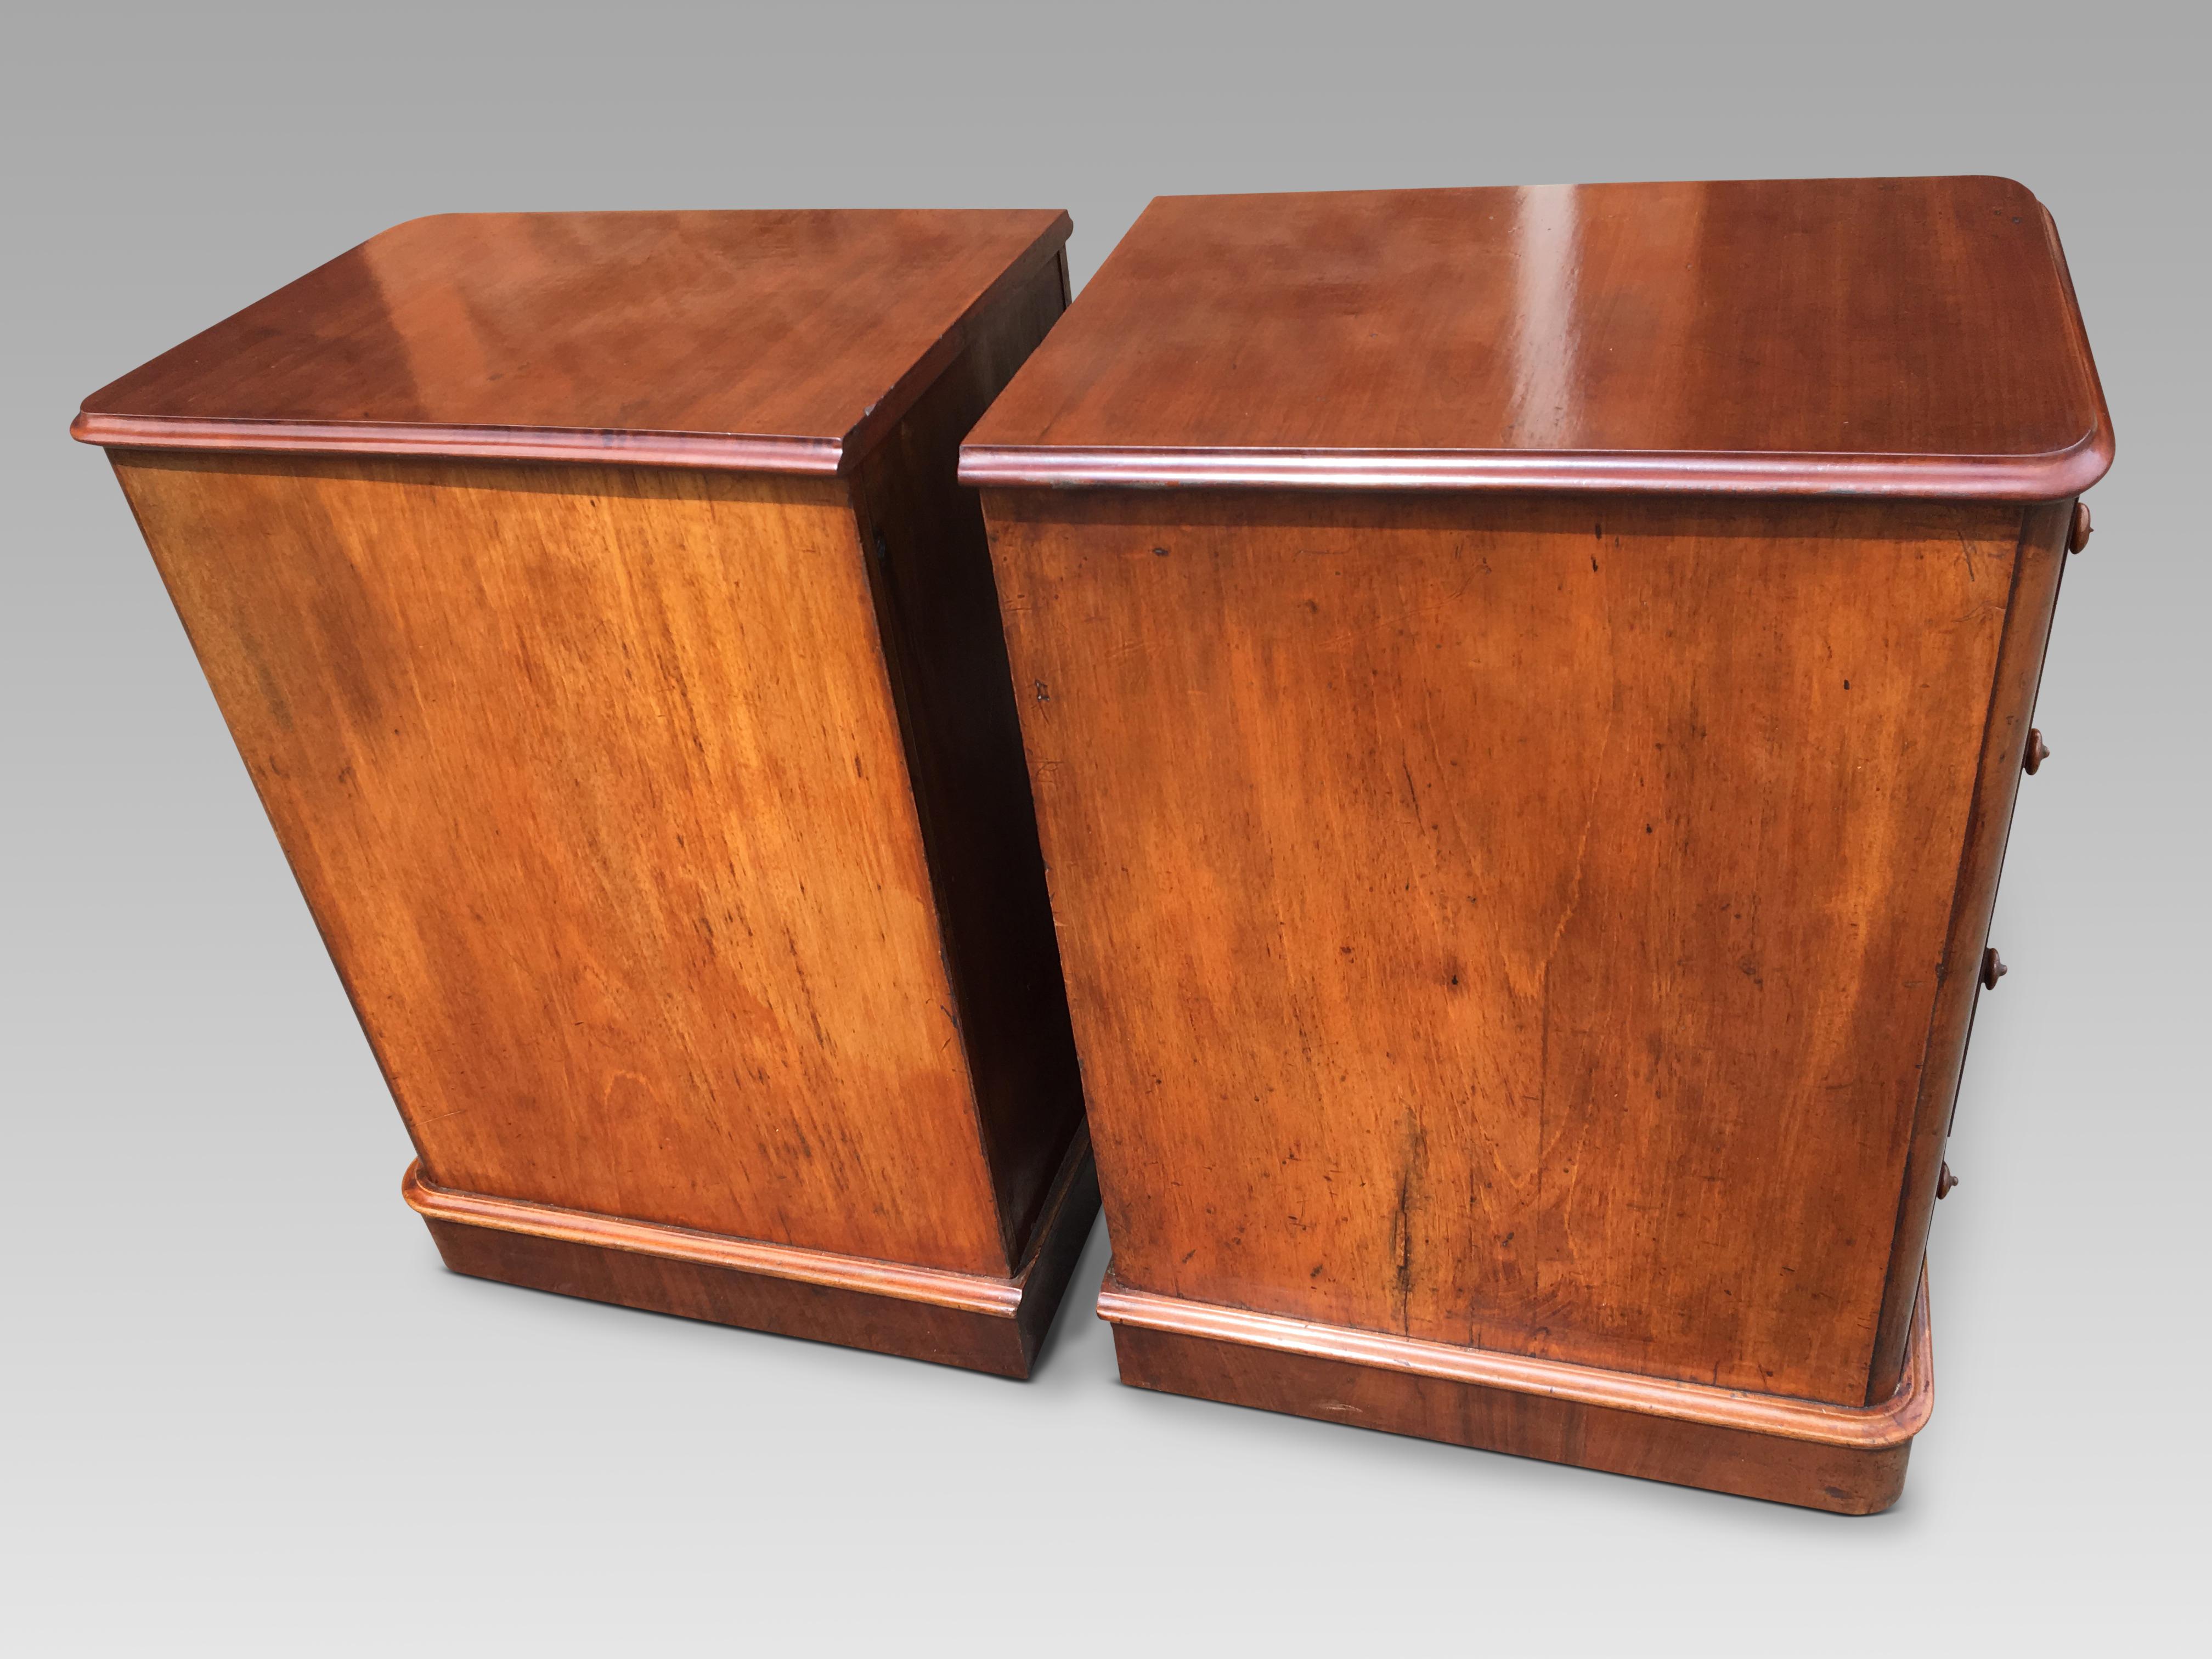 English Pair of Mahogany Bedside Cabinets or Chests